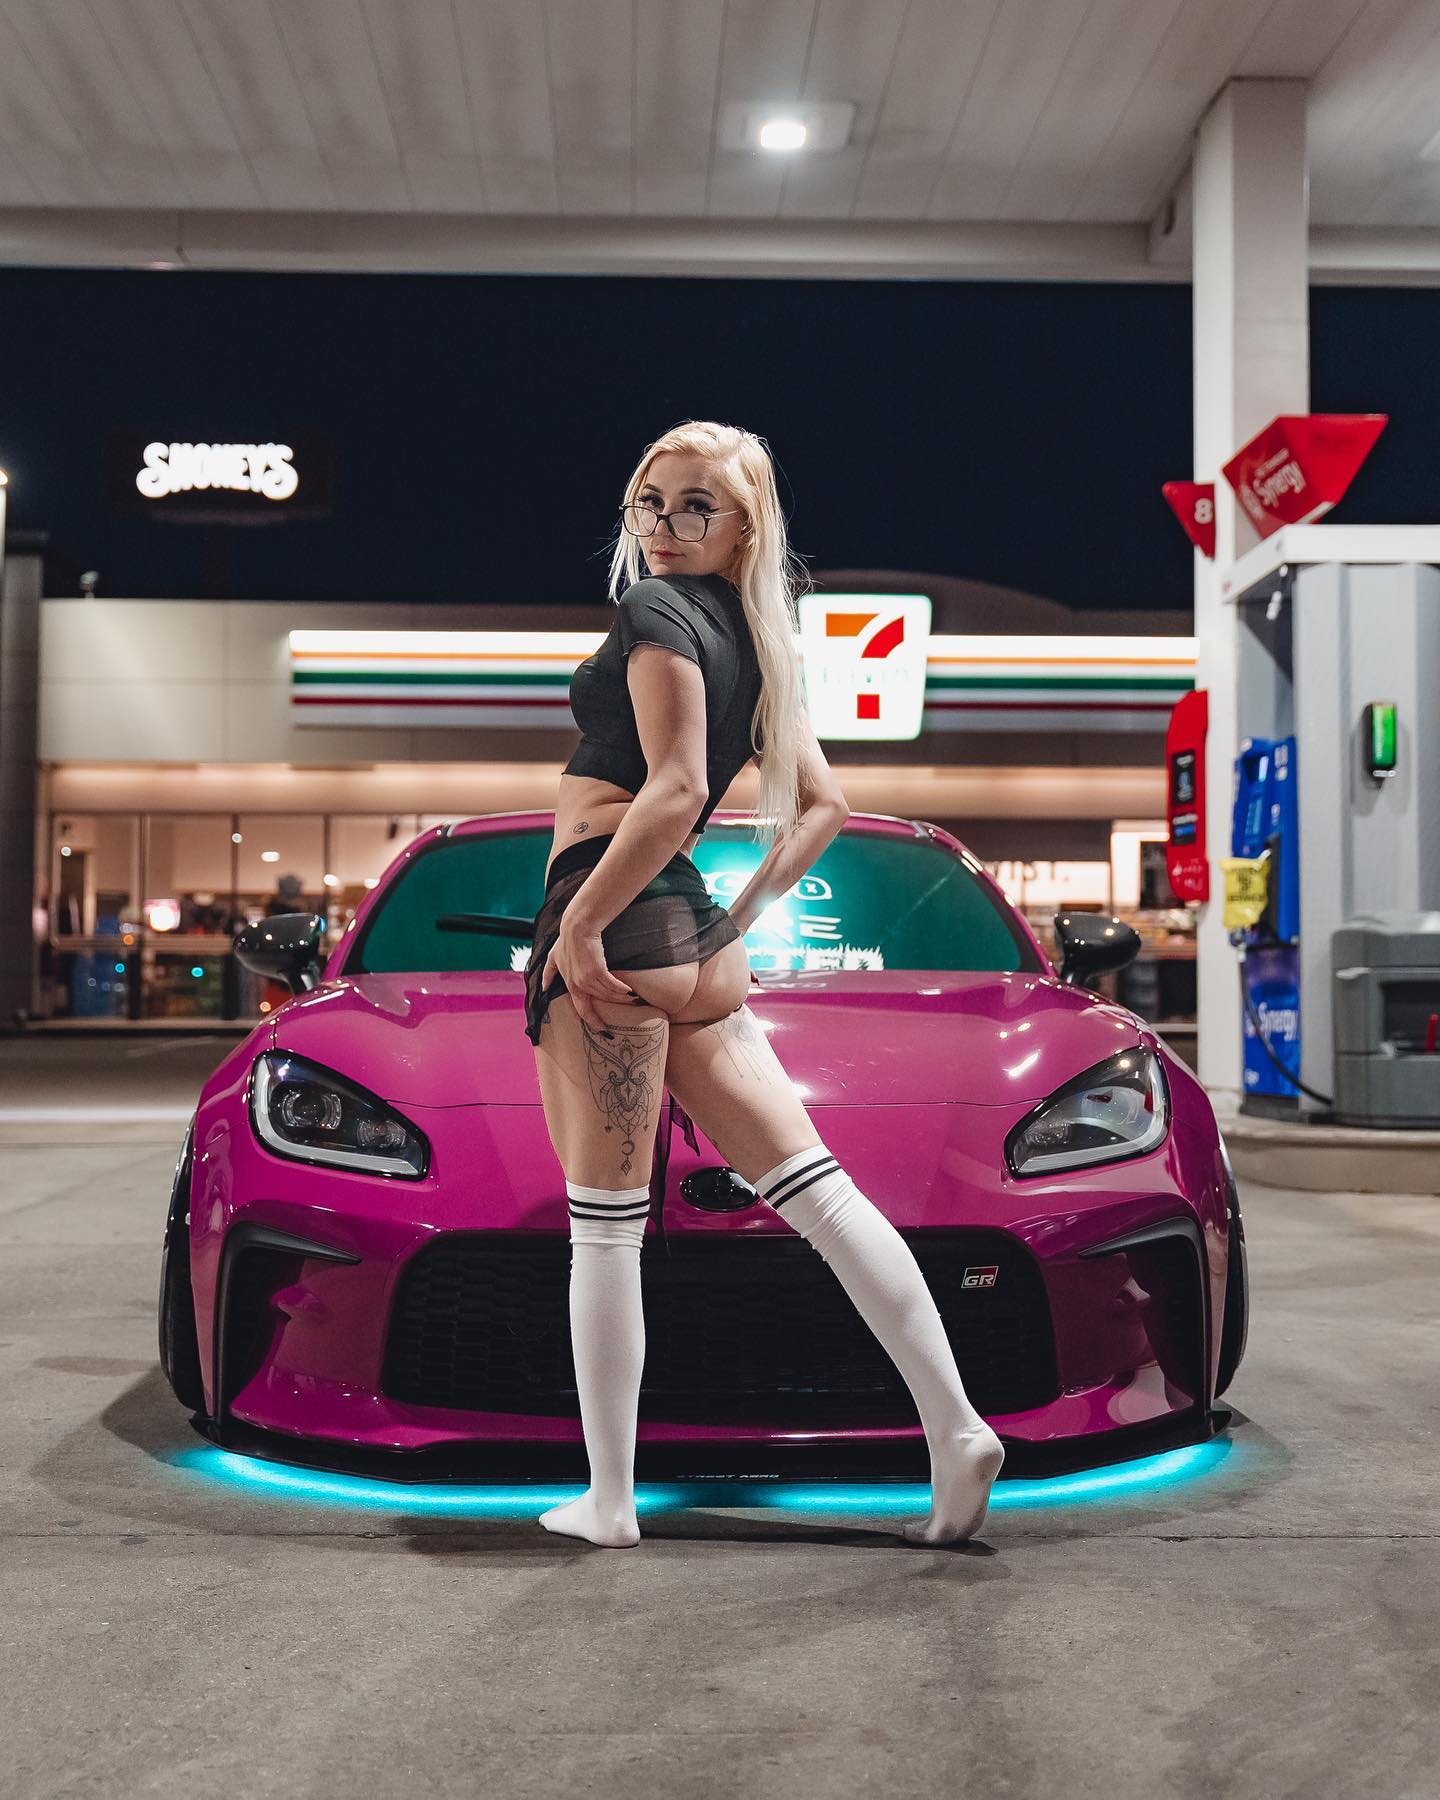 And I grind my fuckin’ teeth until the blood puddles 🩸🖤
📸: @nsc__media 
💃: @themeganlee 

Use code Cambercody for 10% off @quicktaps 
Use code aem-Cambercody for 10% off @aemtuners 

#gr86 #brz #toyota #subaru #model #7eleven #7elevencars #bagged #static #camber #cambergang #slammedenuff #frs #scion #jdm #jdmculture #jdmlifestyle #jdmnation #cleanculture #asm #atlanticstreetmovement #fitted #stanced #stance #tint #low #fitment